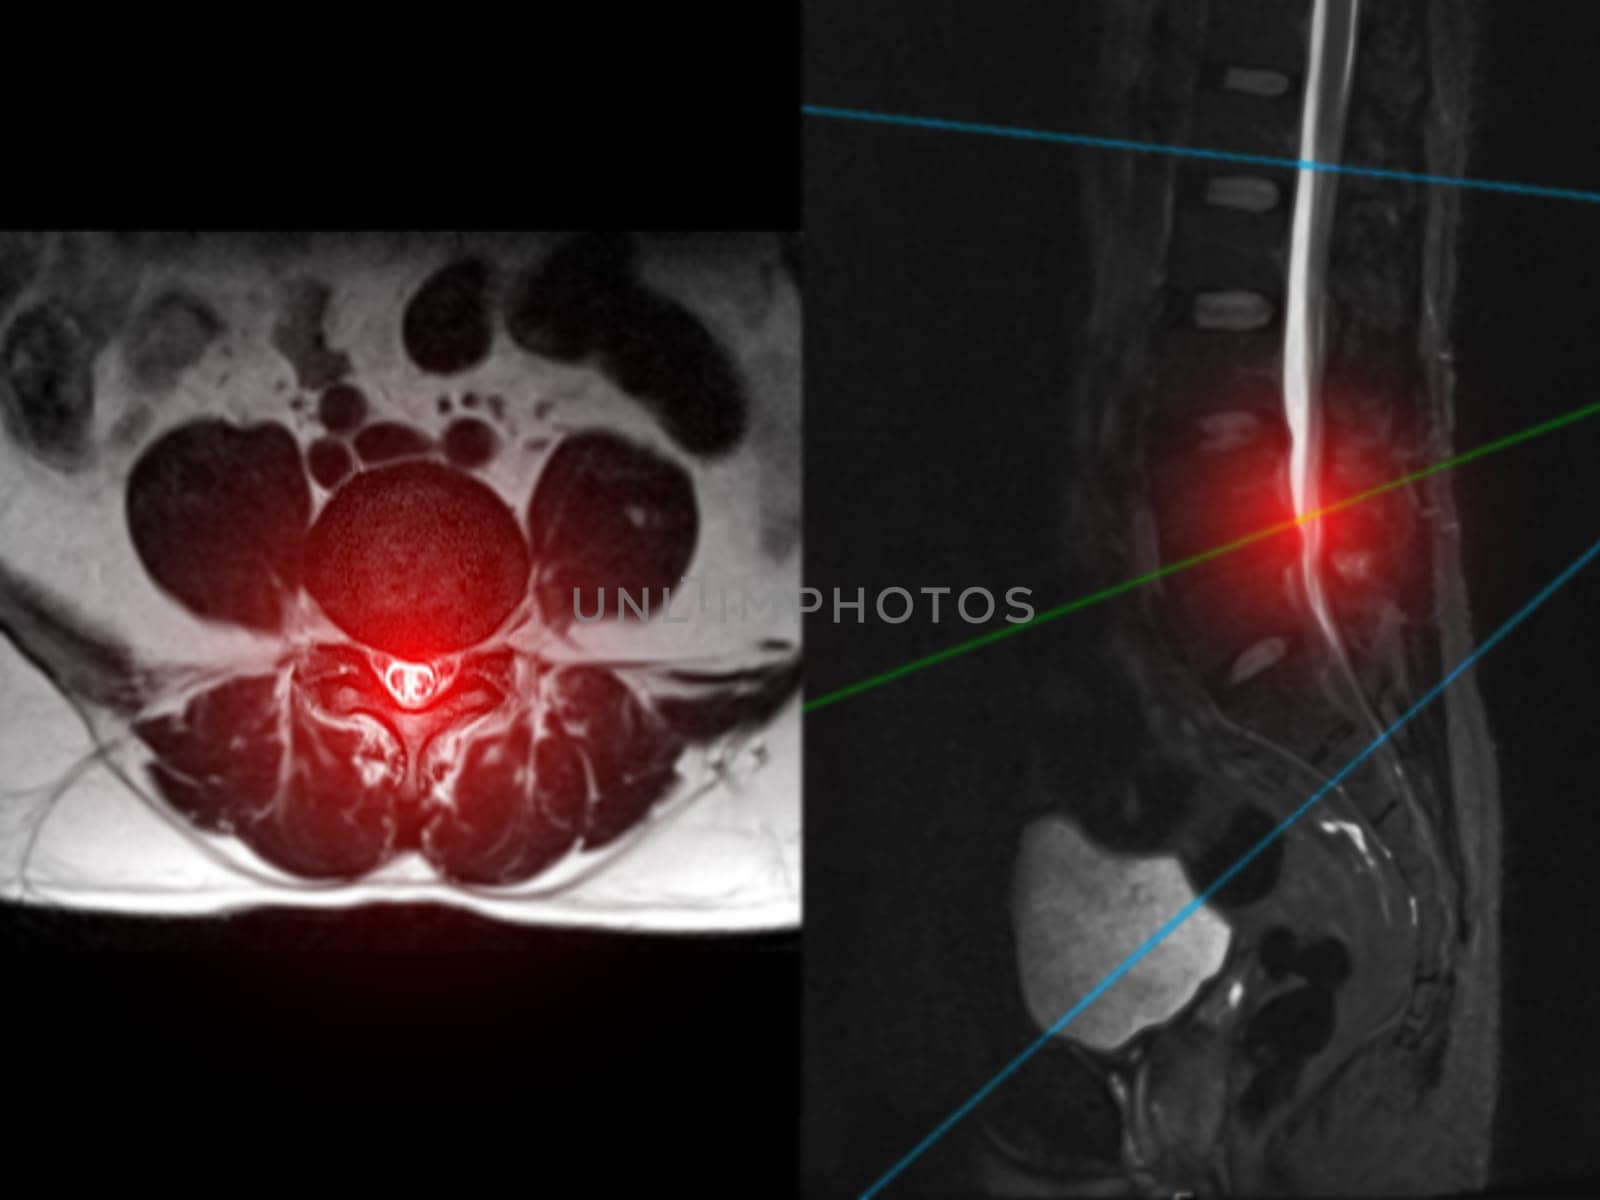 MRI L-S spine or lumbar spine Axial T2W view with sagittal plane for diagnosis spinal cord compression. by samunella